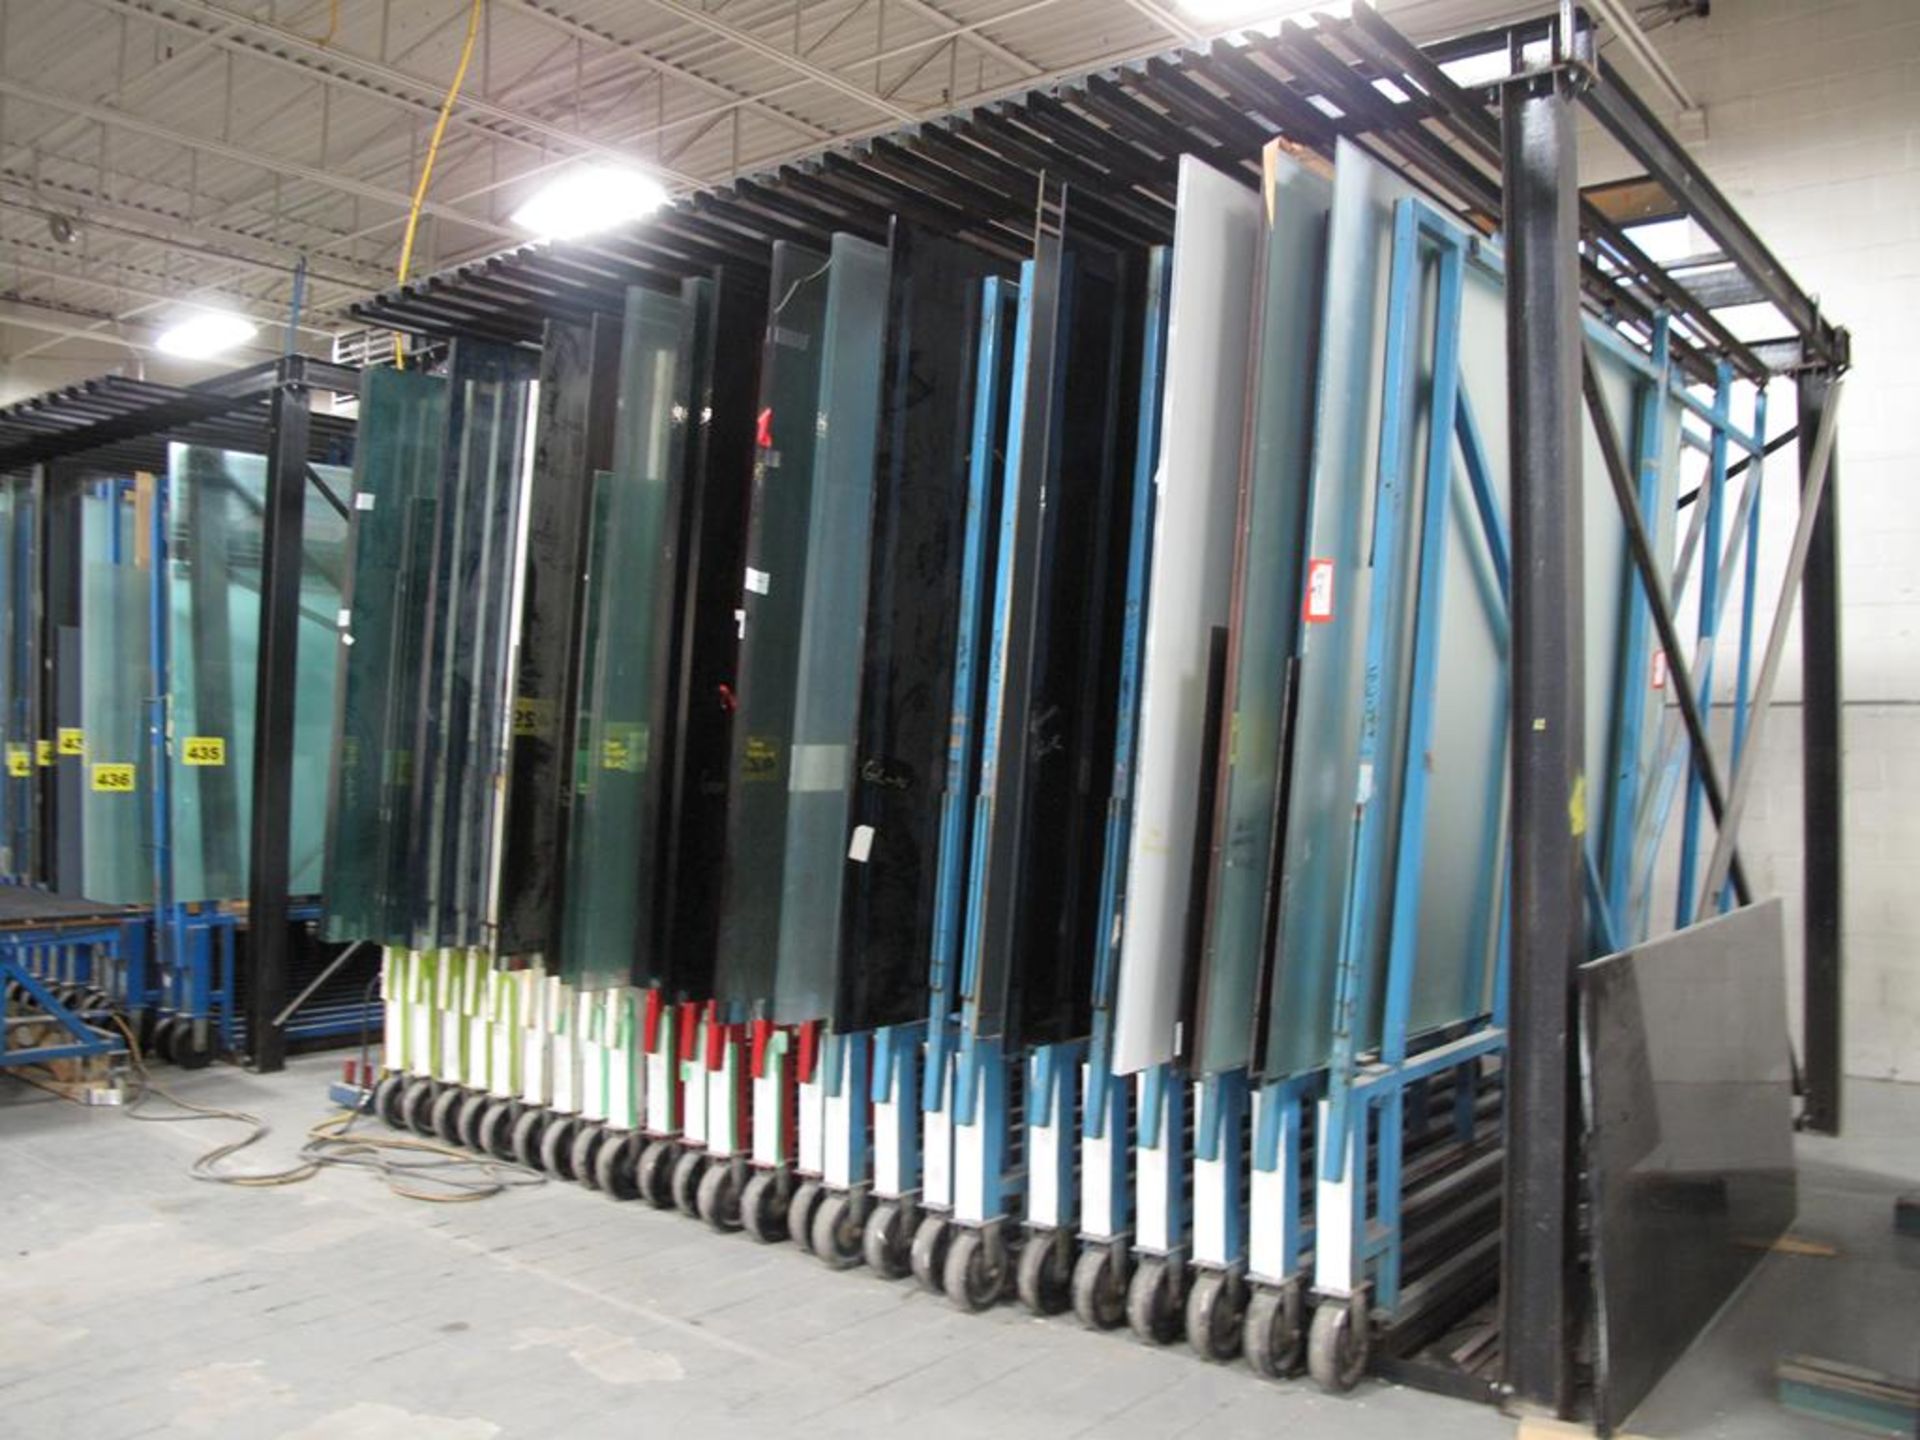 BROMER, 24 DRAWER, GLASS STORAGE SYSTEM, MAX GLASS SIZE 96" T X 140" LONG, MAX CAPACITY 4500 LBS. - Image 3 of 5